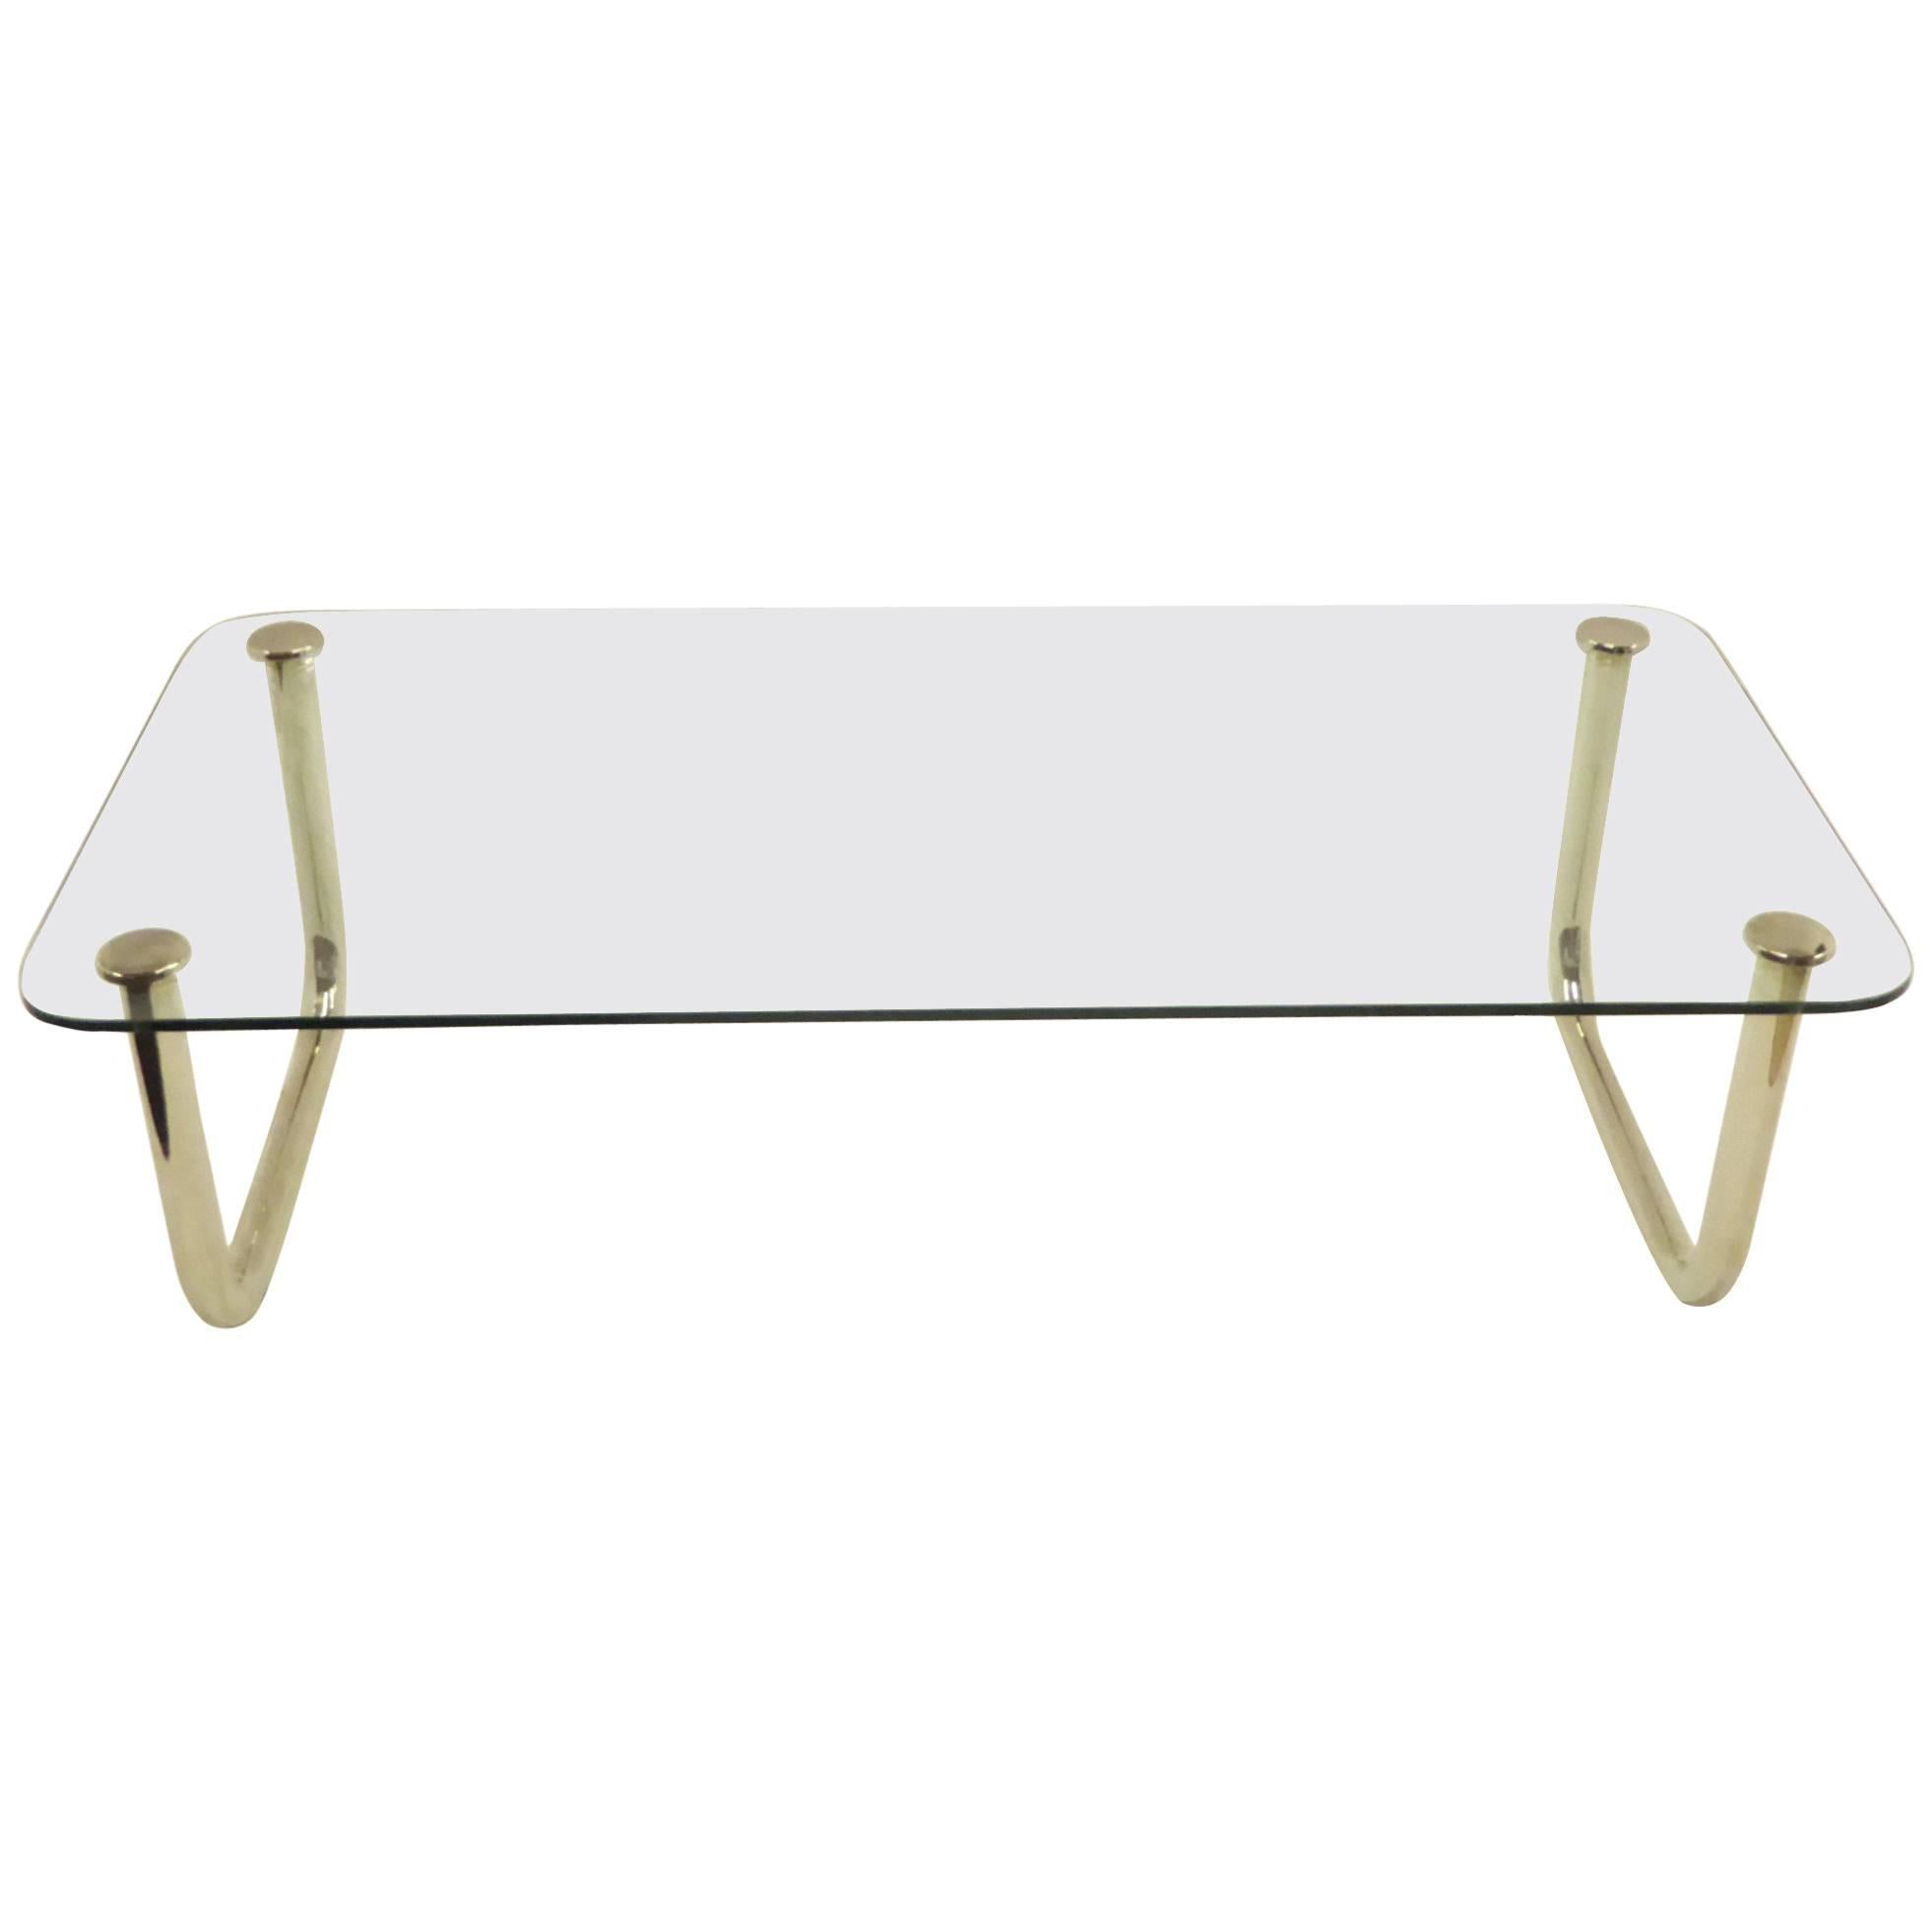 1960s Long Mascheroni Style Glass and Nickel Chrome Sled Leg Coffee Table